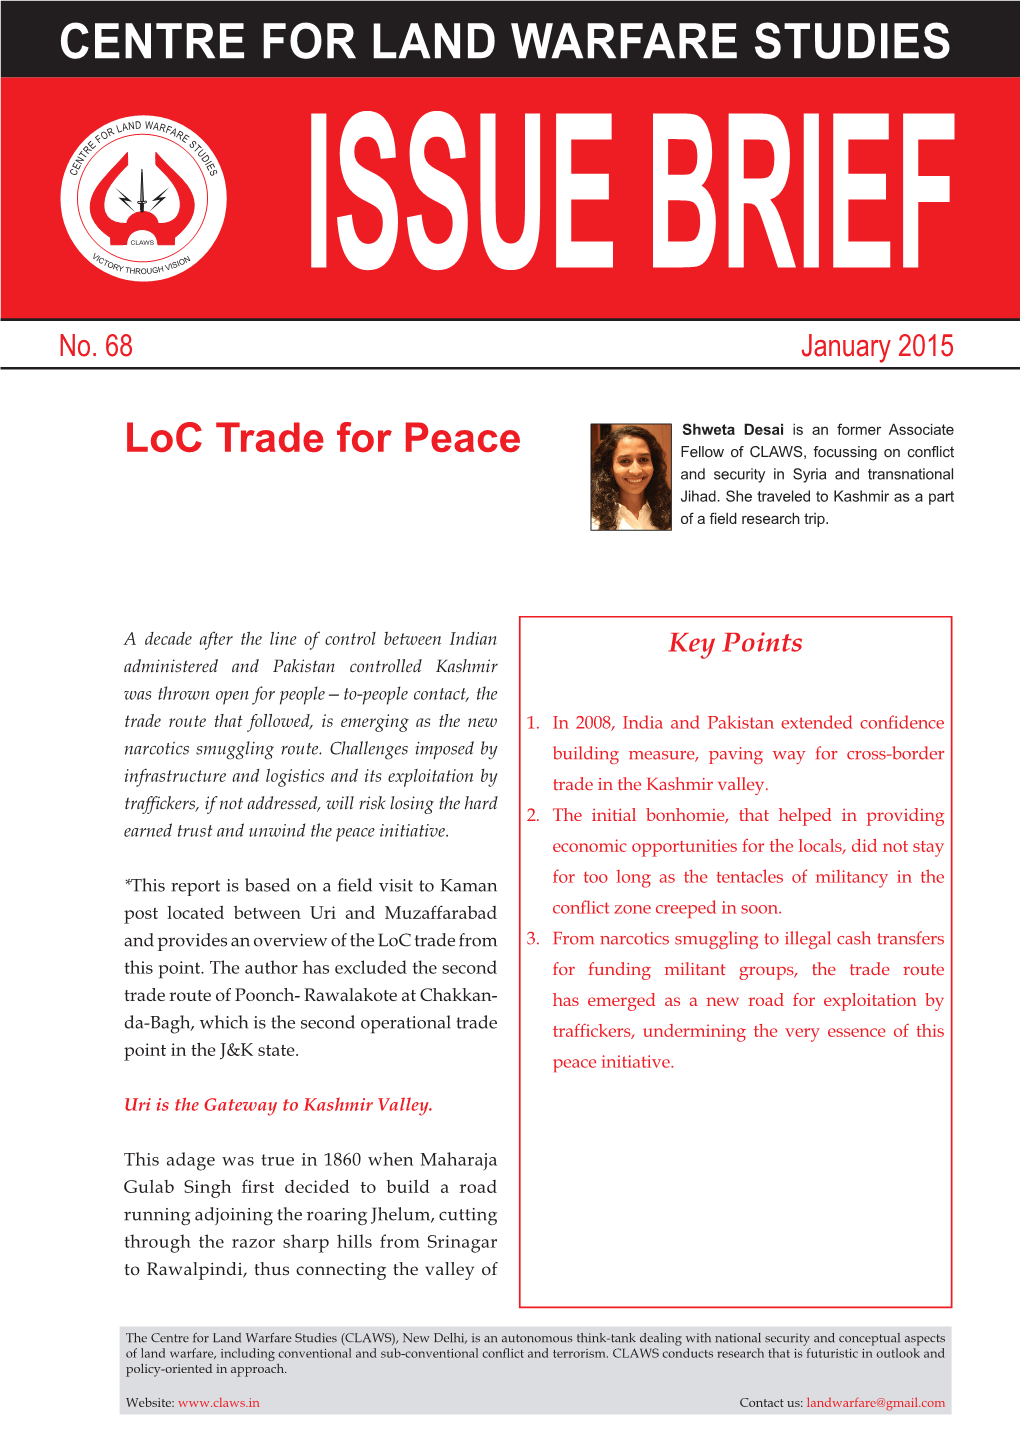 Loc Trade for Peace Fellow of CLAWS, Focussing on Conflict and Security in Syria and Transnational Jihad